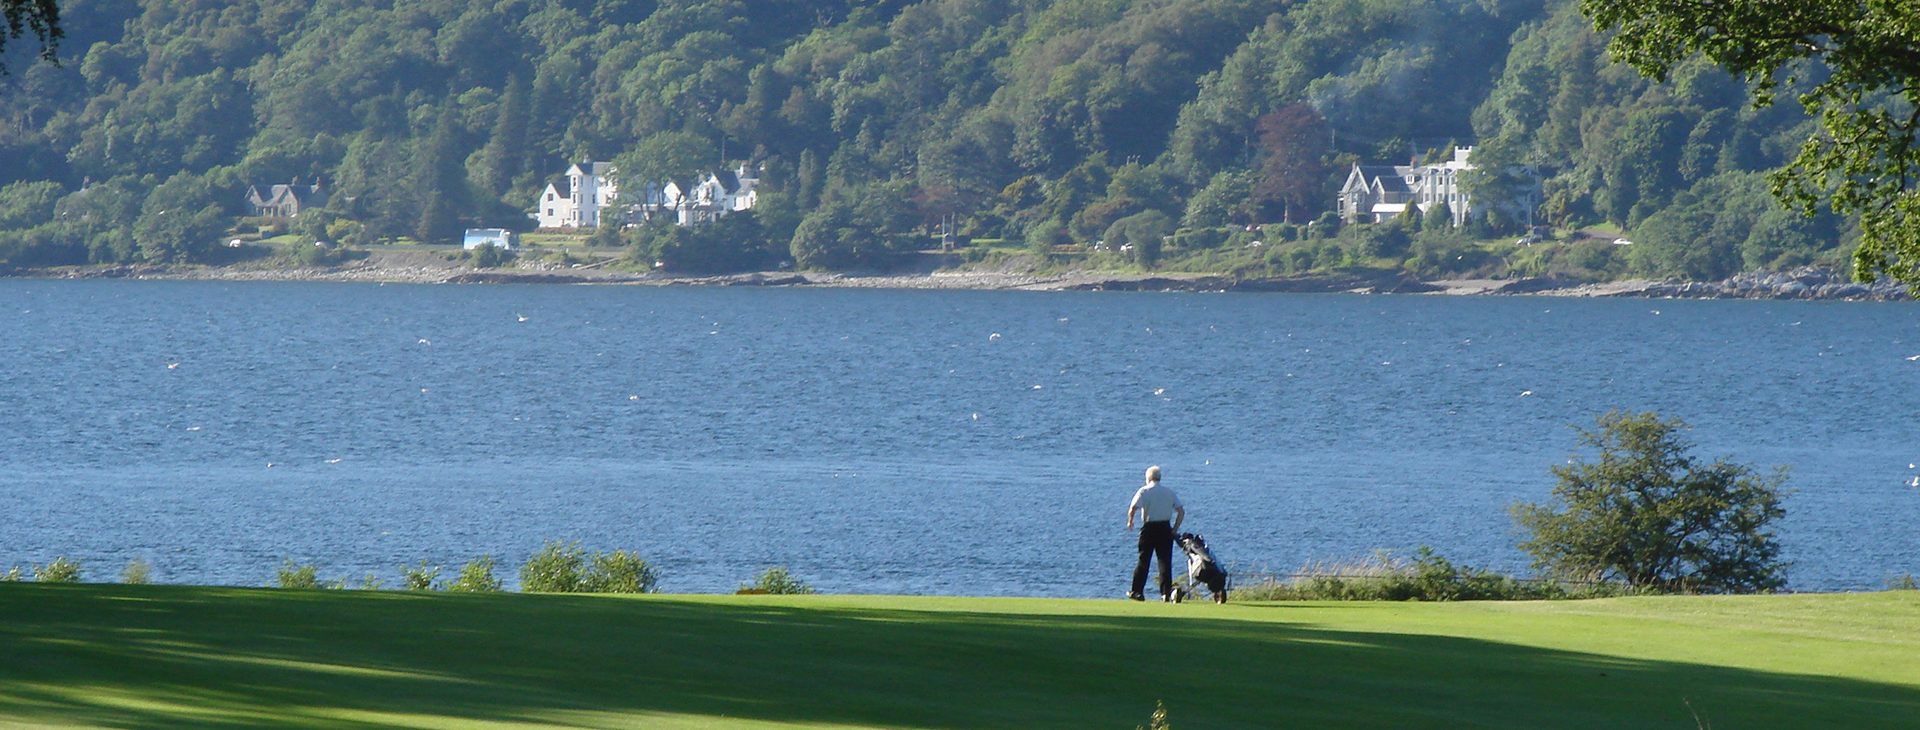 Guests at Birchbrae Highland Lodges enjoy free golf at the Dragon's Tooth Golf Course